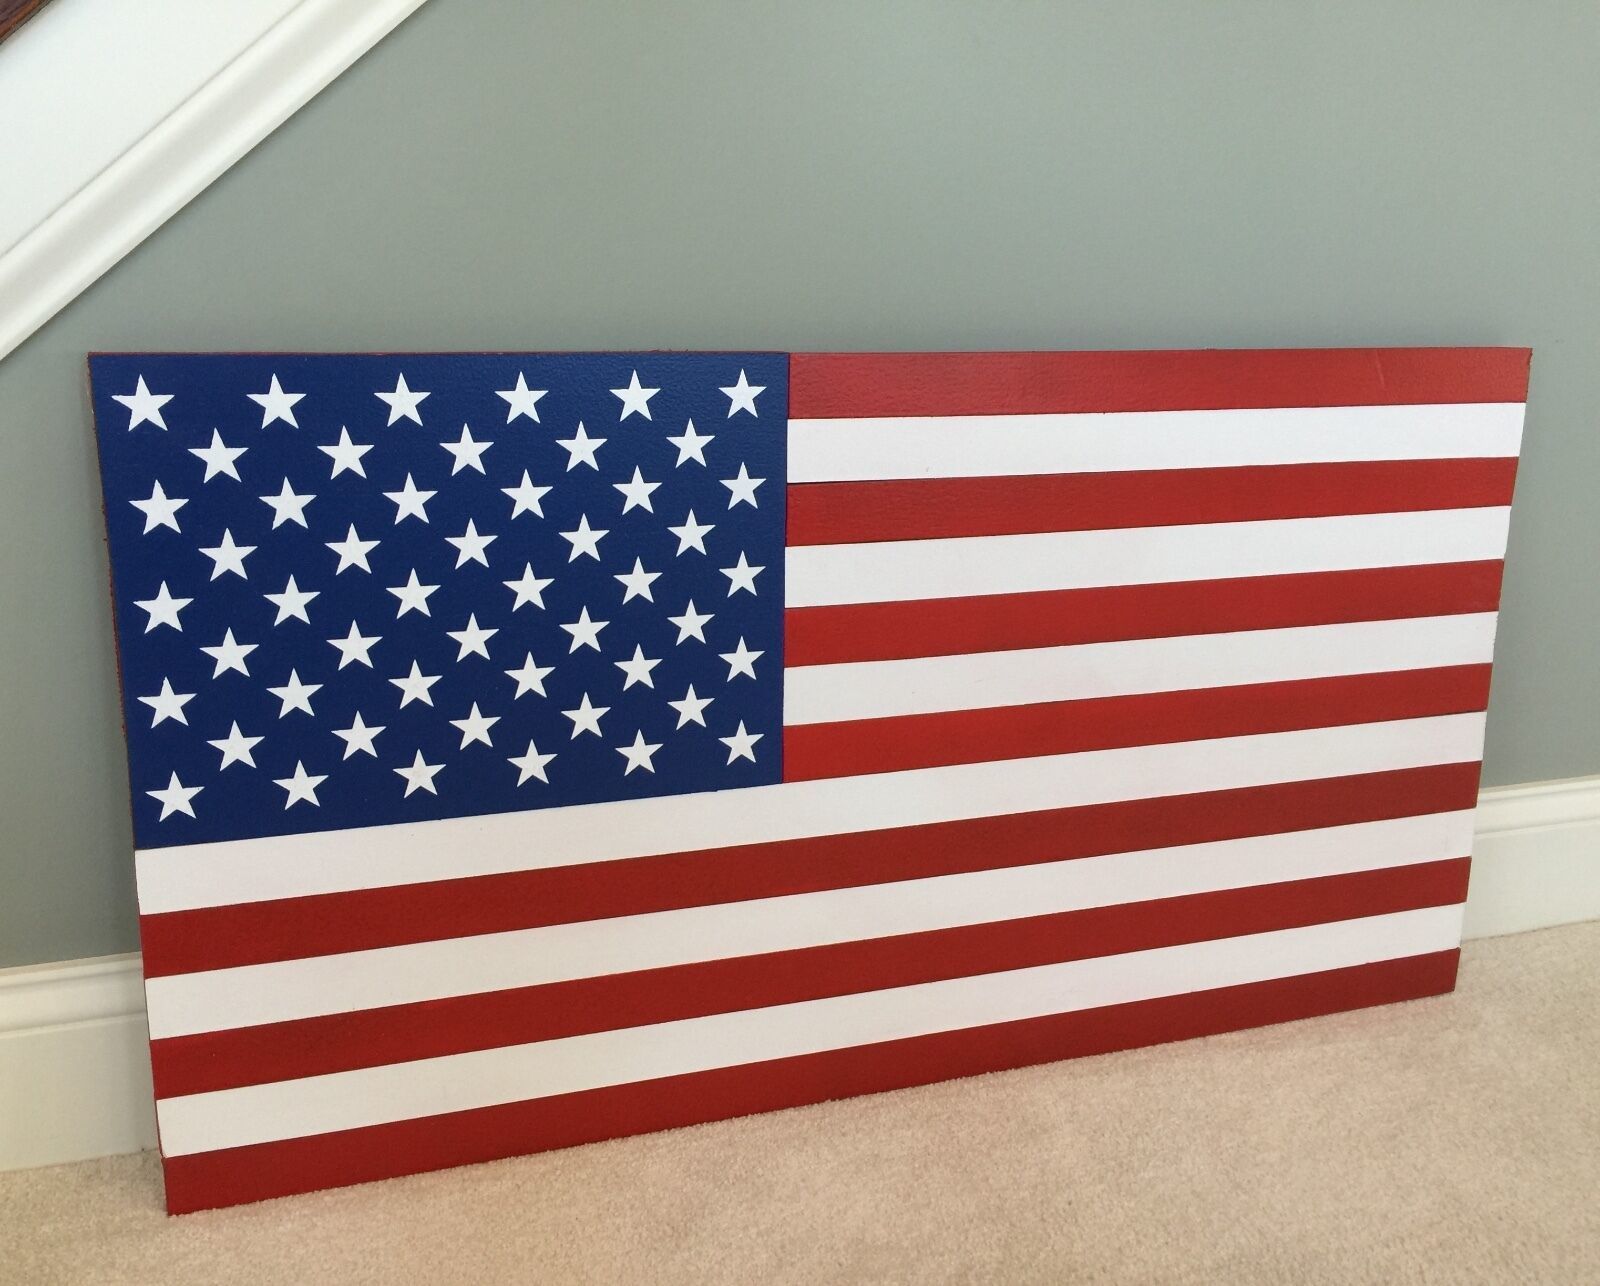 Primary image for New 36 Inch XL Handcrafted Wood American Flag. Original Colors. 100% Made in USA